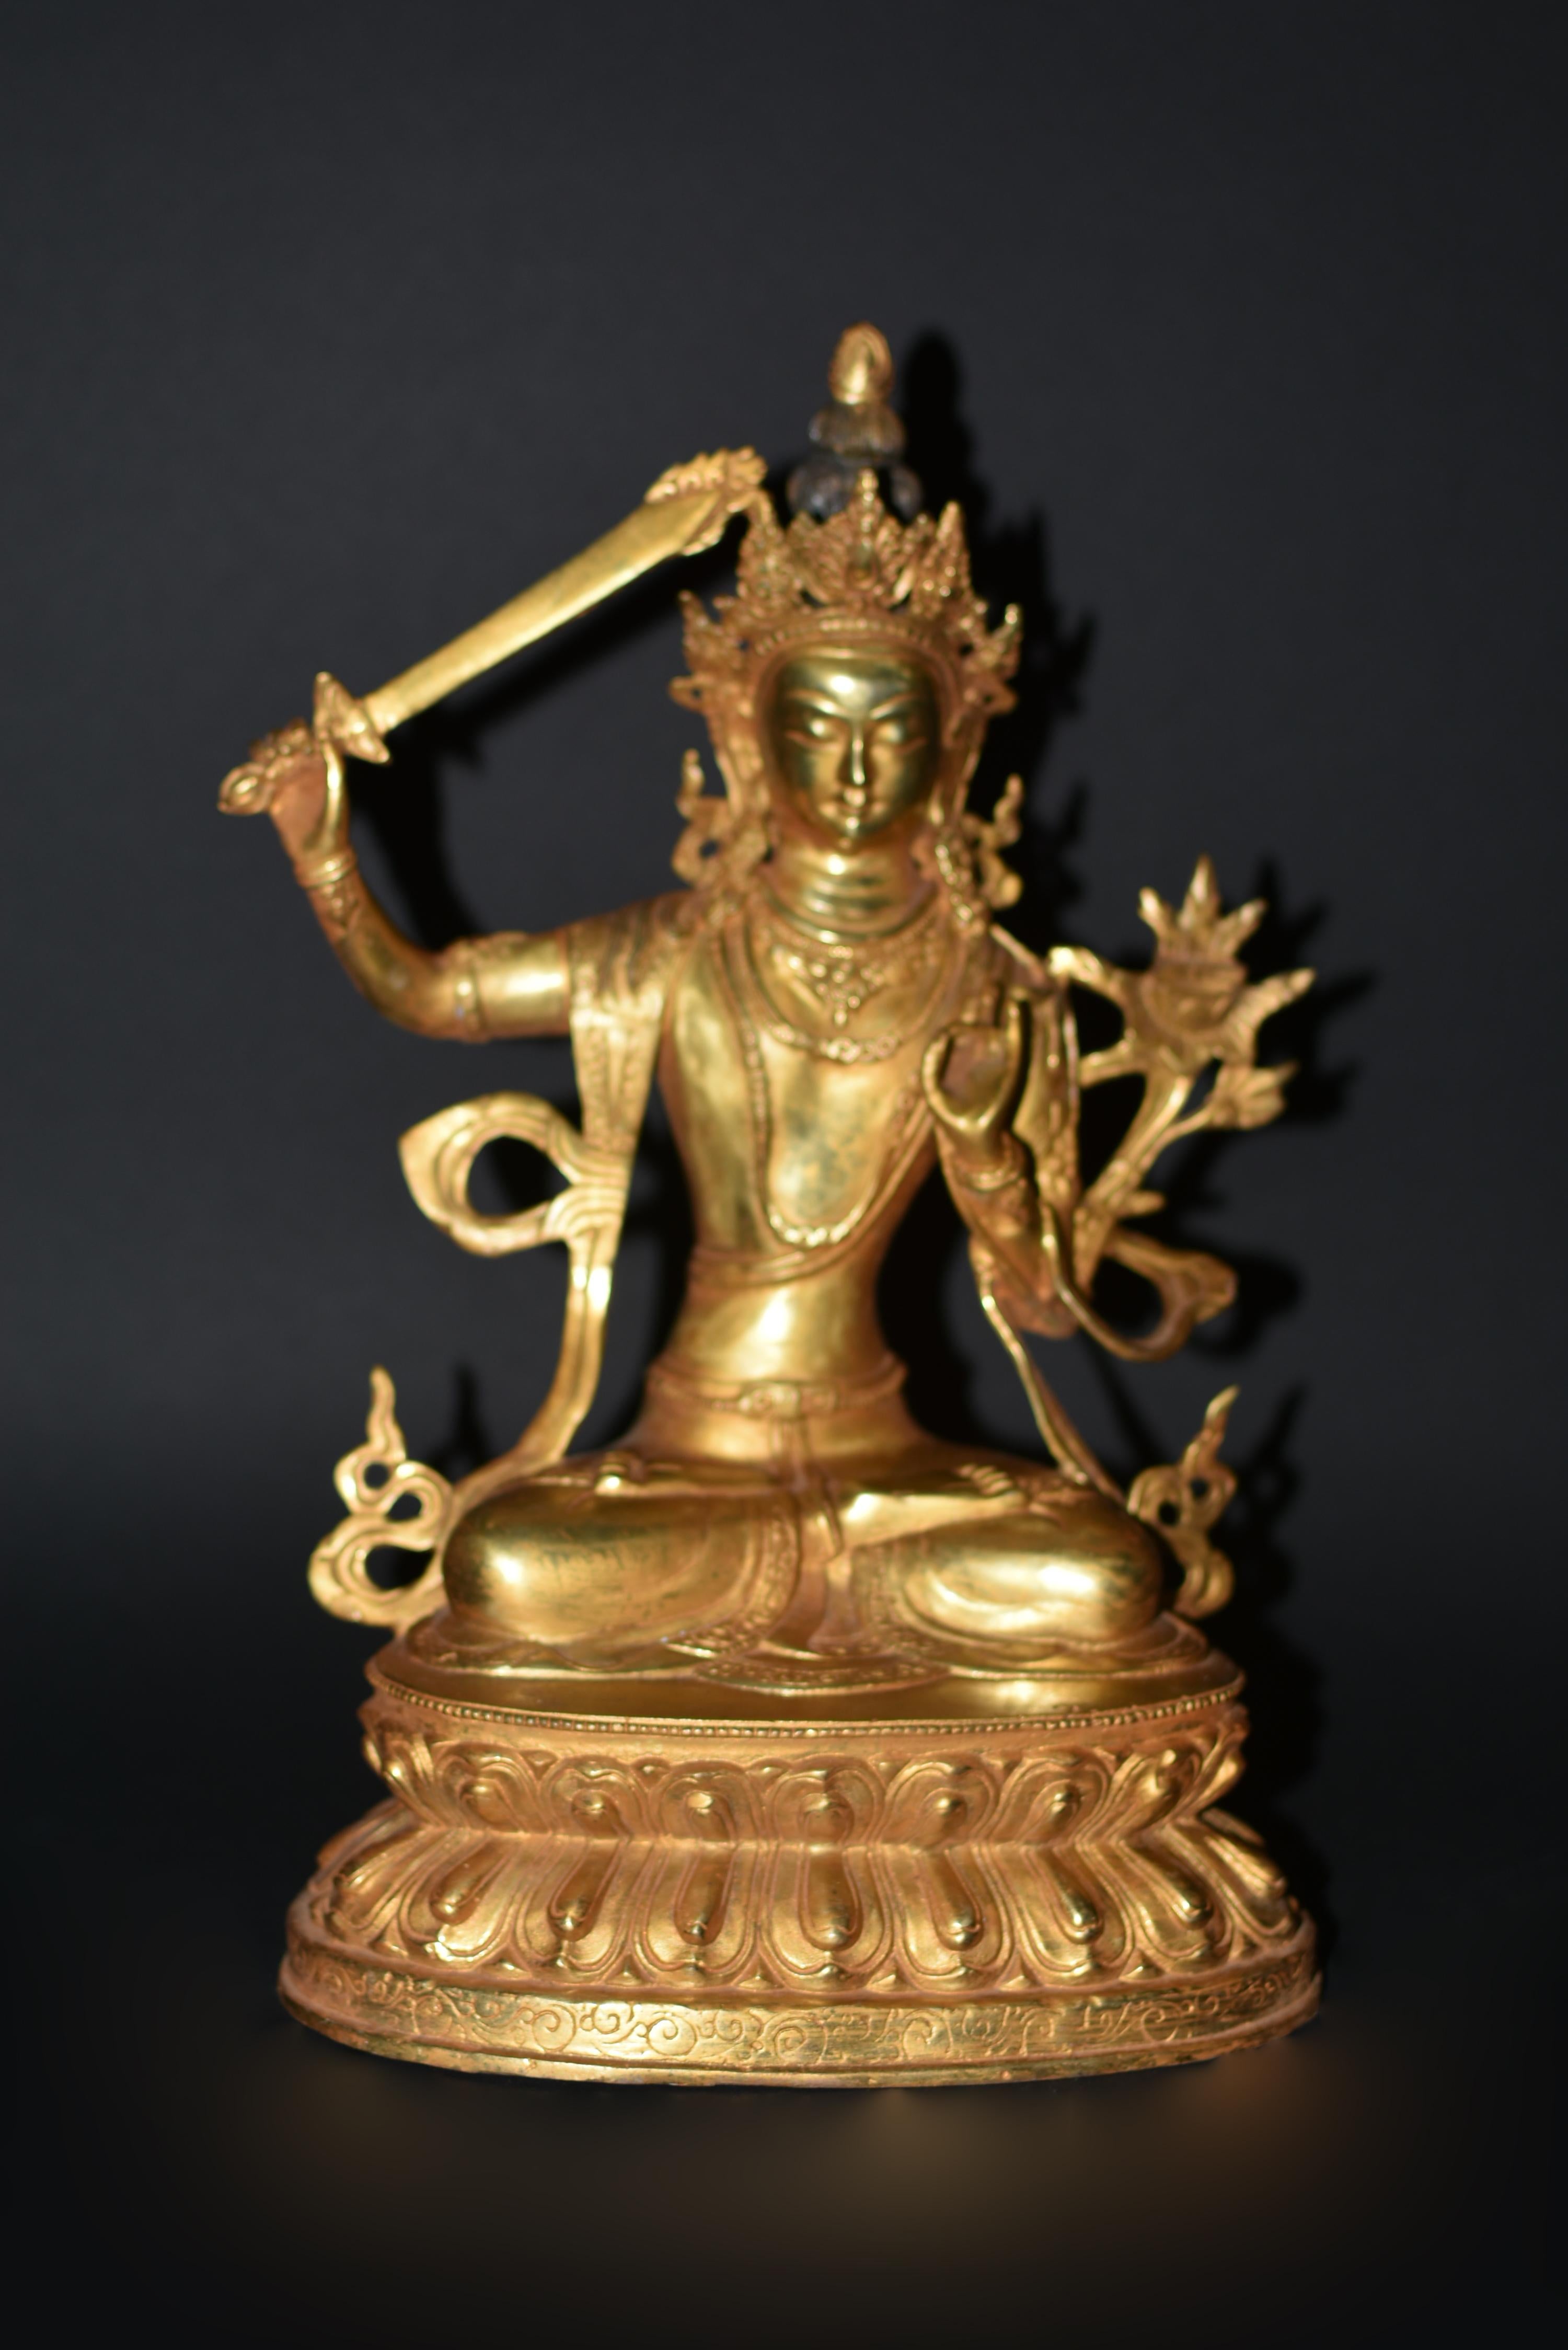 A large, beautiful gilt bronze, 6.35 lb statue of Tibetan Bodhisattva Manjushree. This special piece features Manjushree with lowered head in the motion of observing and taking action. Seated in vajrasana on a double lotus throne, in his right hand